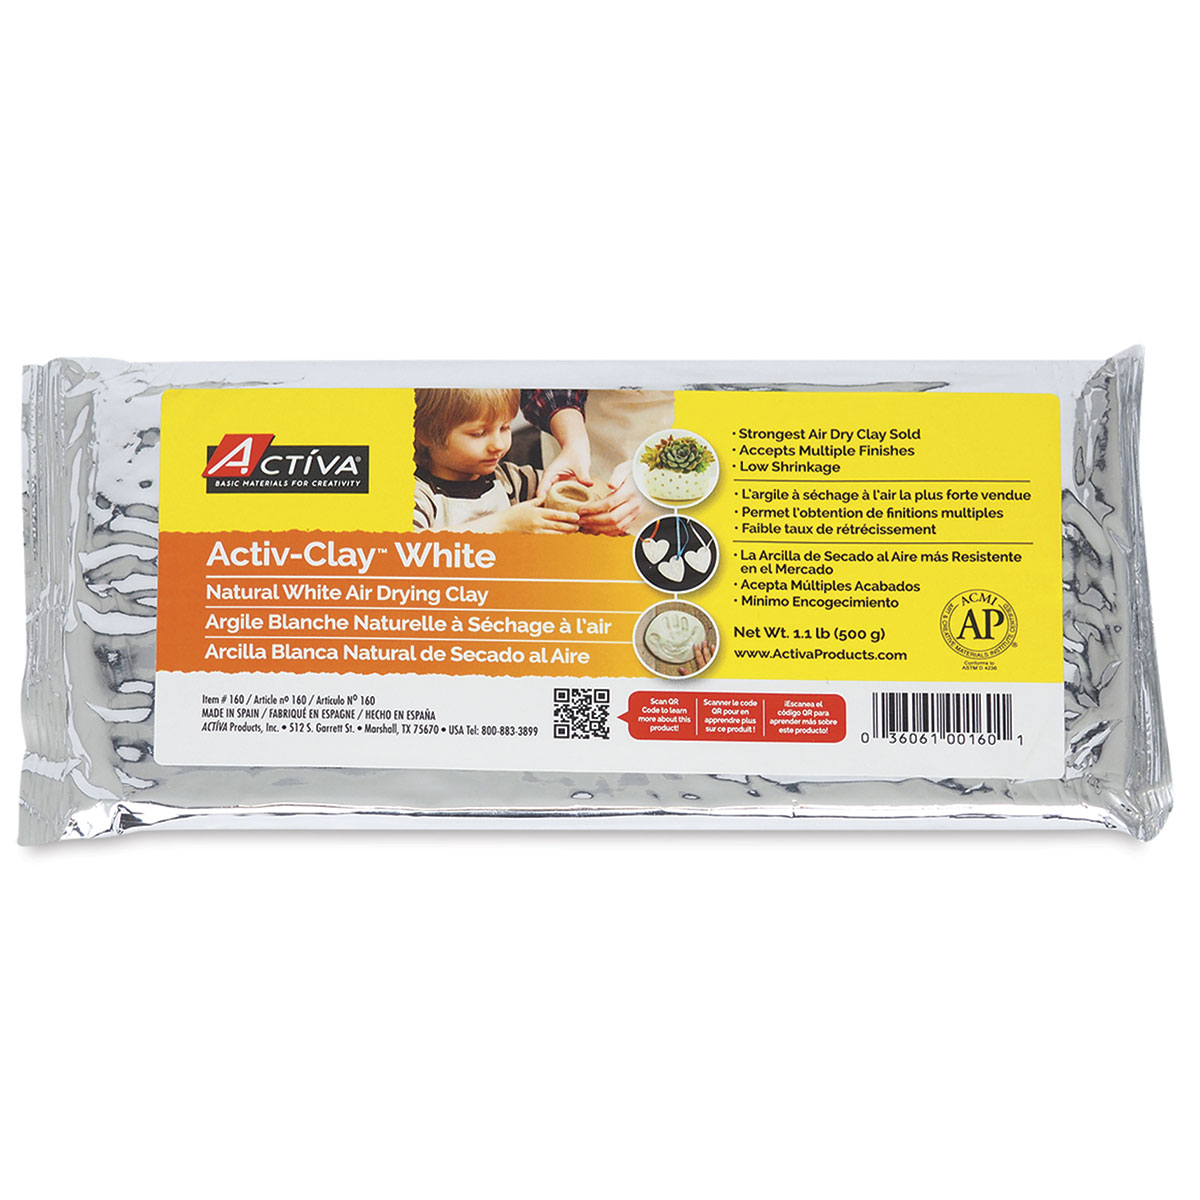 Activ-Clay Air Dry Clay, White, 3.3 lbs. API182 22.5 New